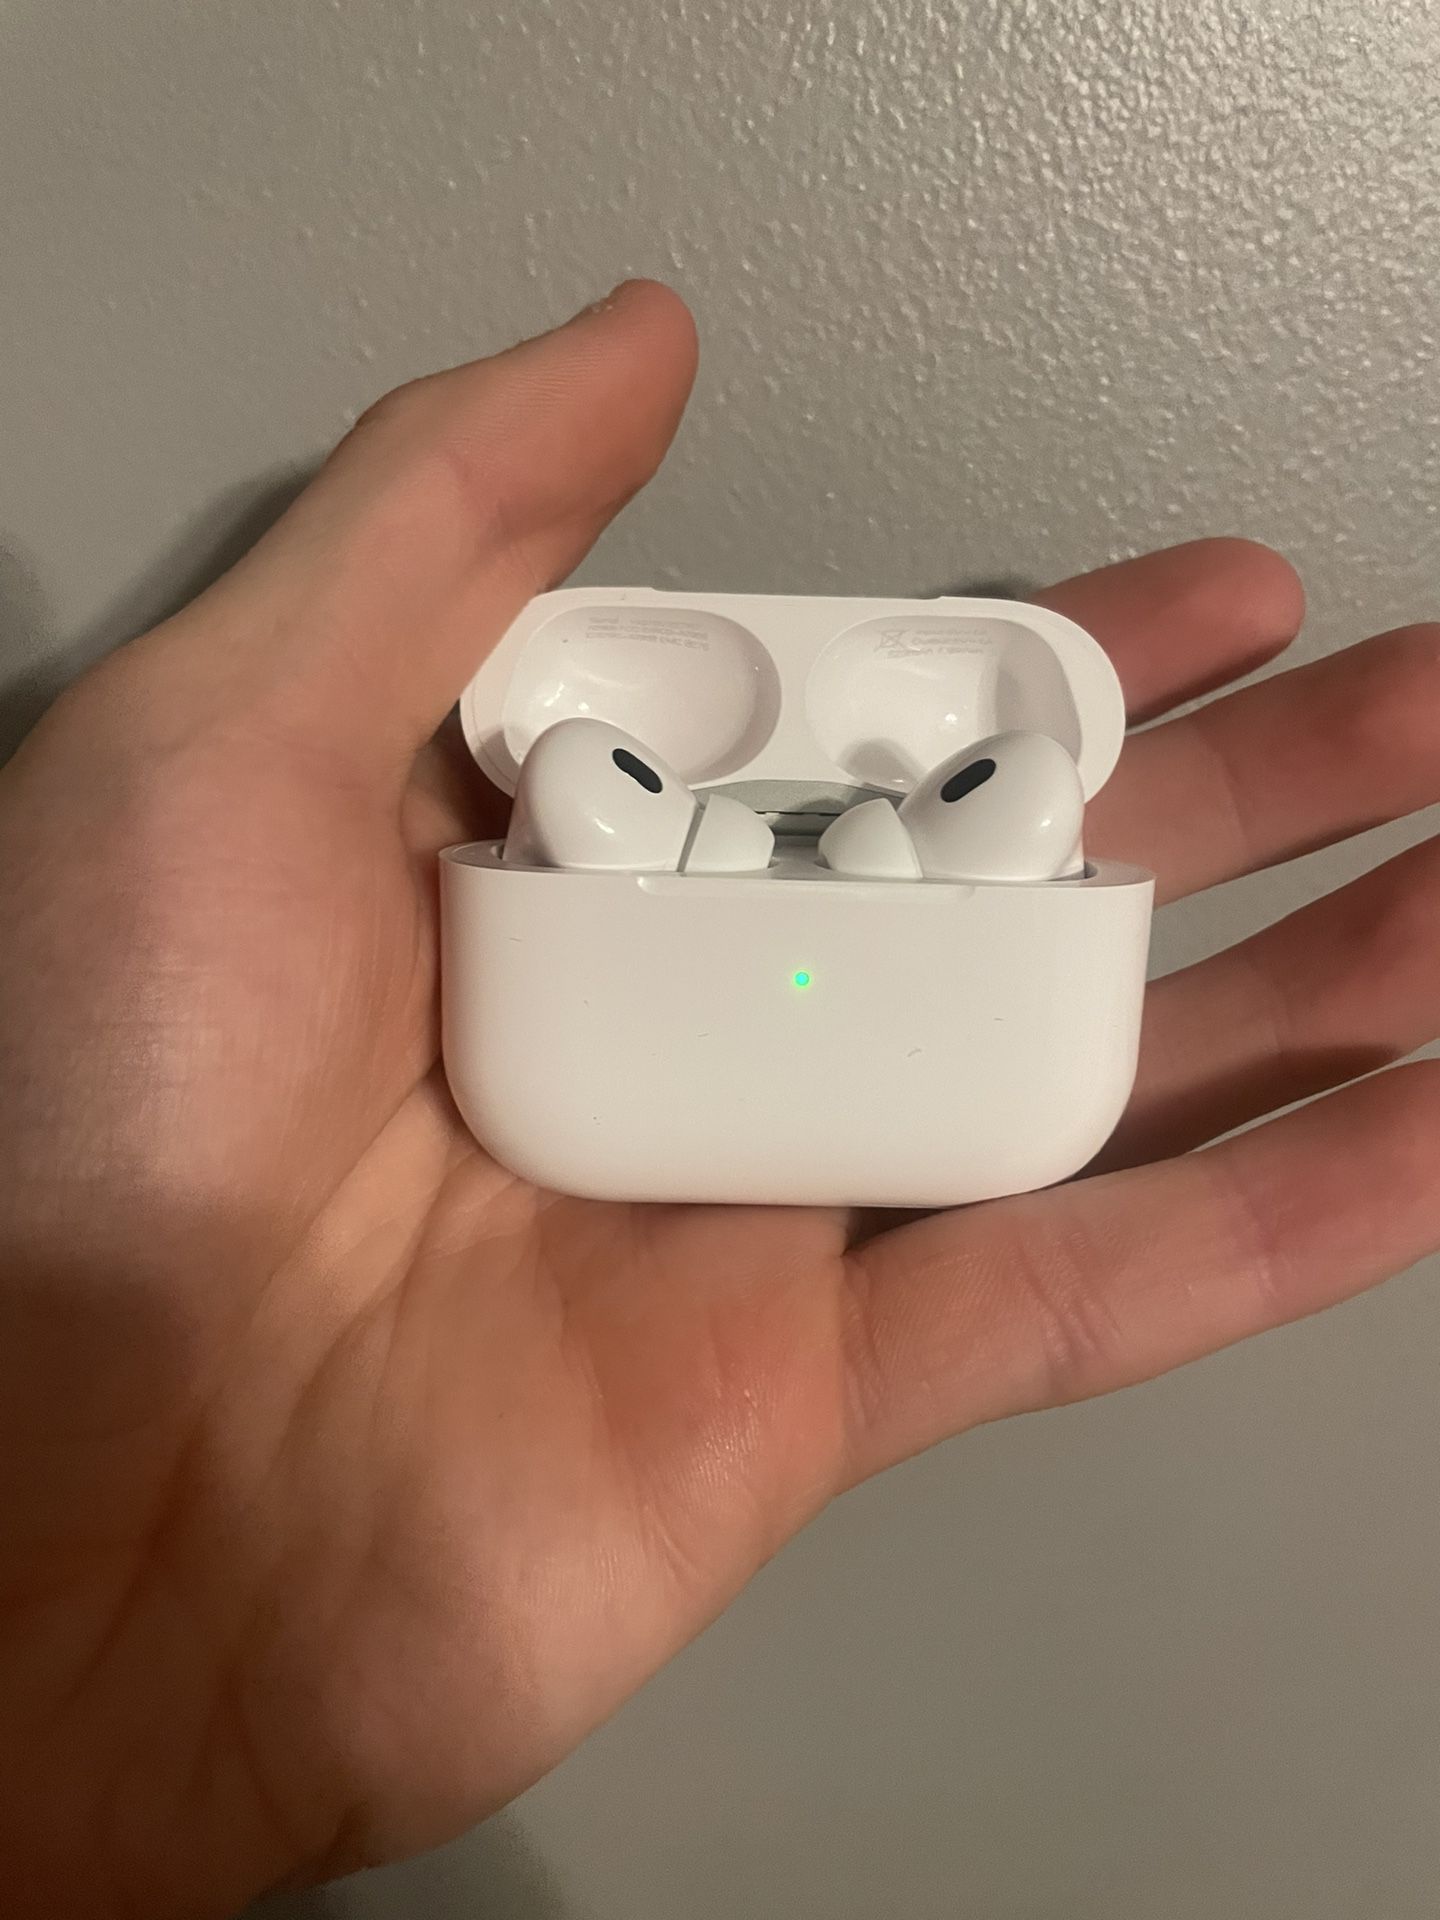 Airpod Pros 2nd Generation with MagSafe Charging Case